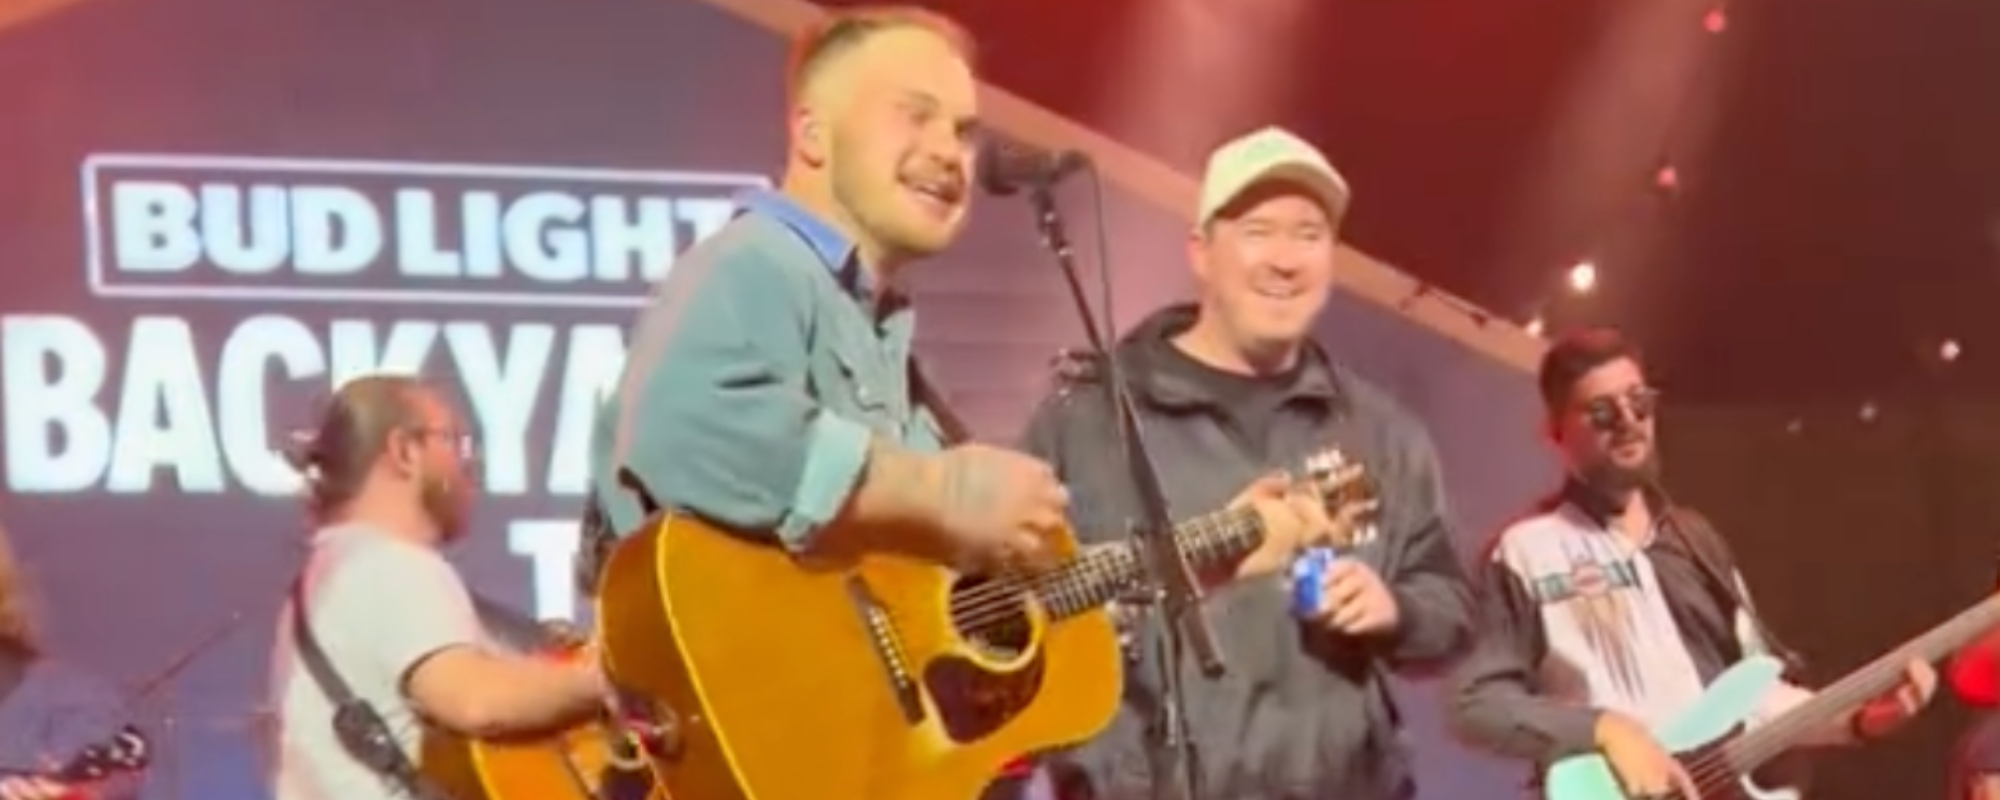 Watch Shane Gillis Join Zach Bryan for Perfectly Awkward “Revival” Performance